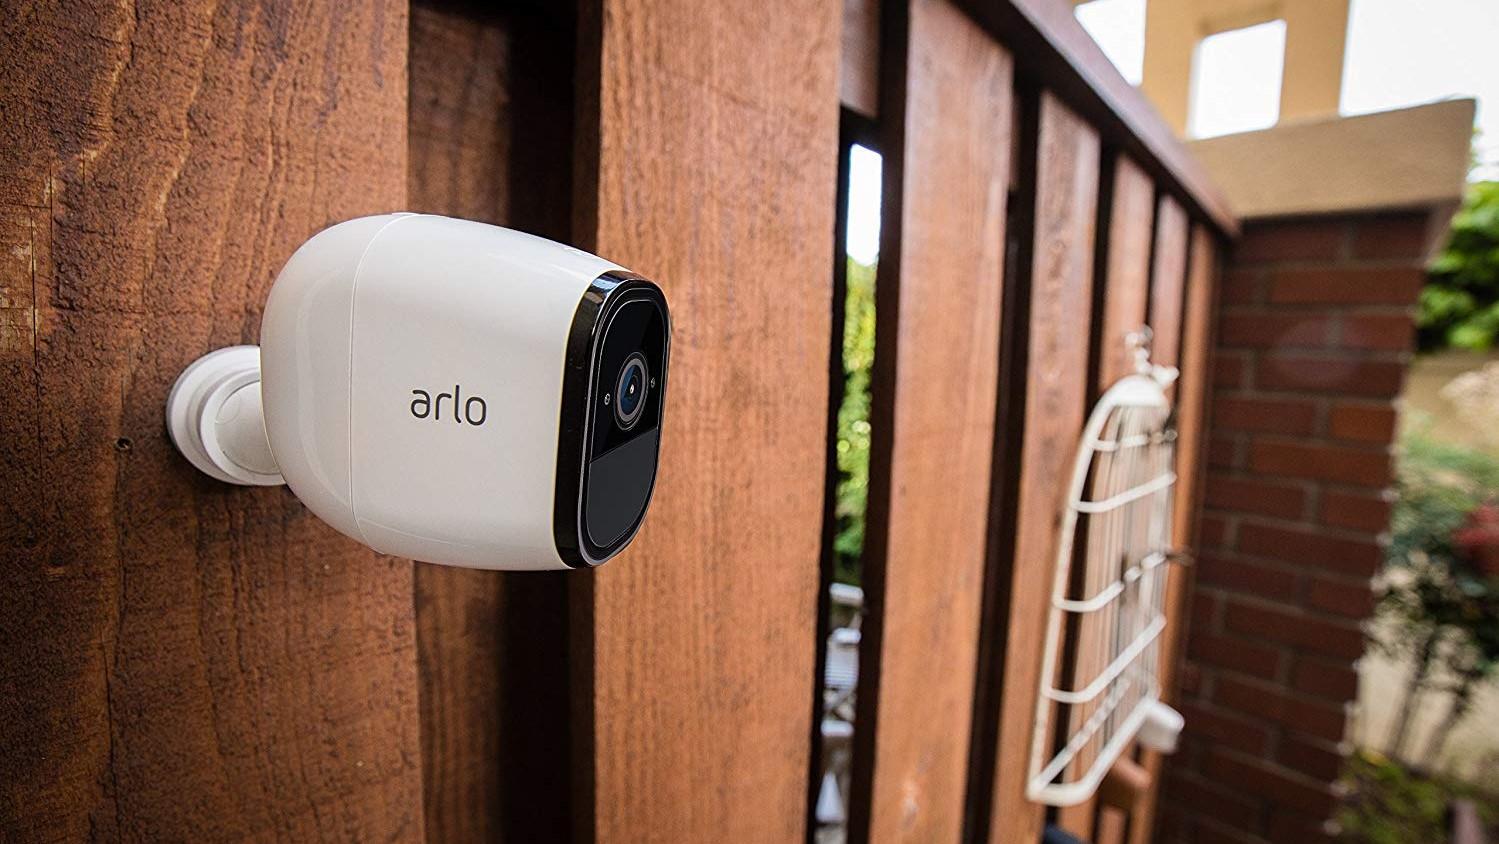 Arlo Pro security camera attached to wall